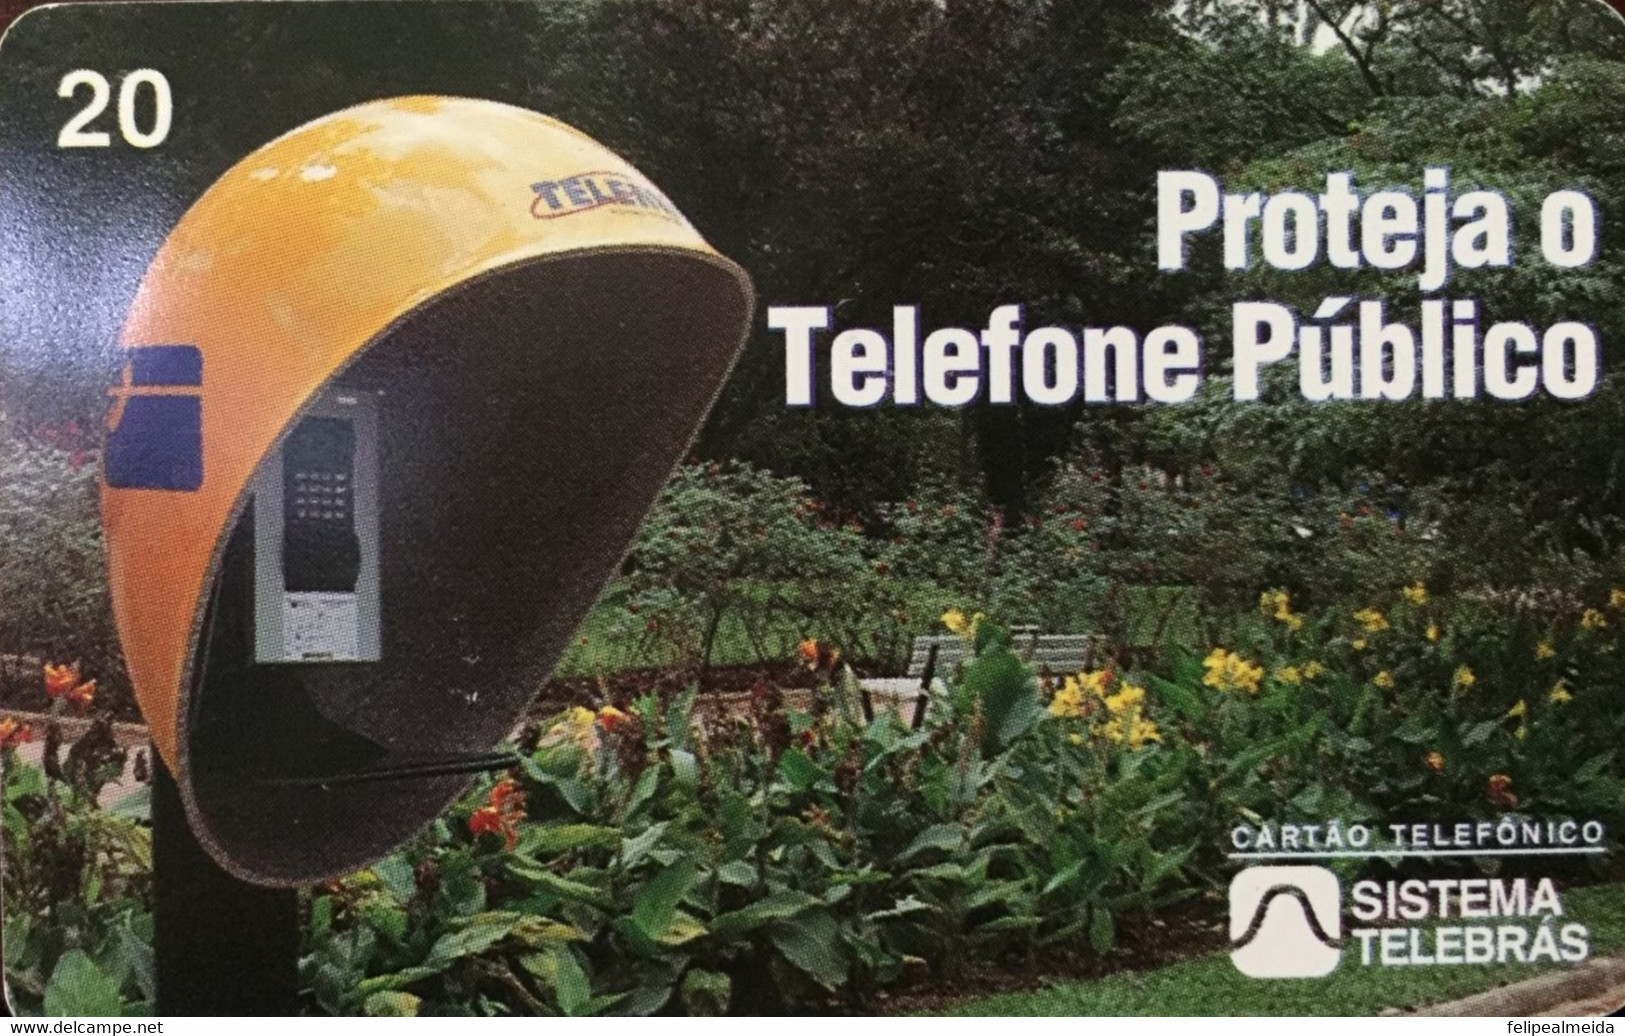 Phone Card Manufactured By Telebras In 1998 - Advertising Campaign For The Conservation Of Public Telephones - Telecom